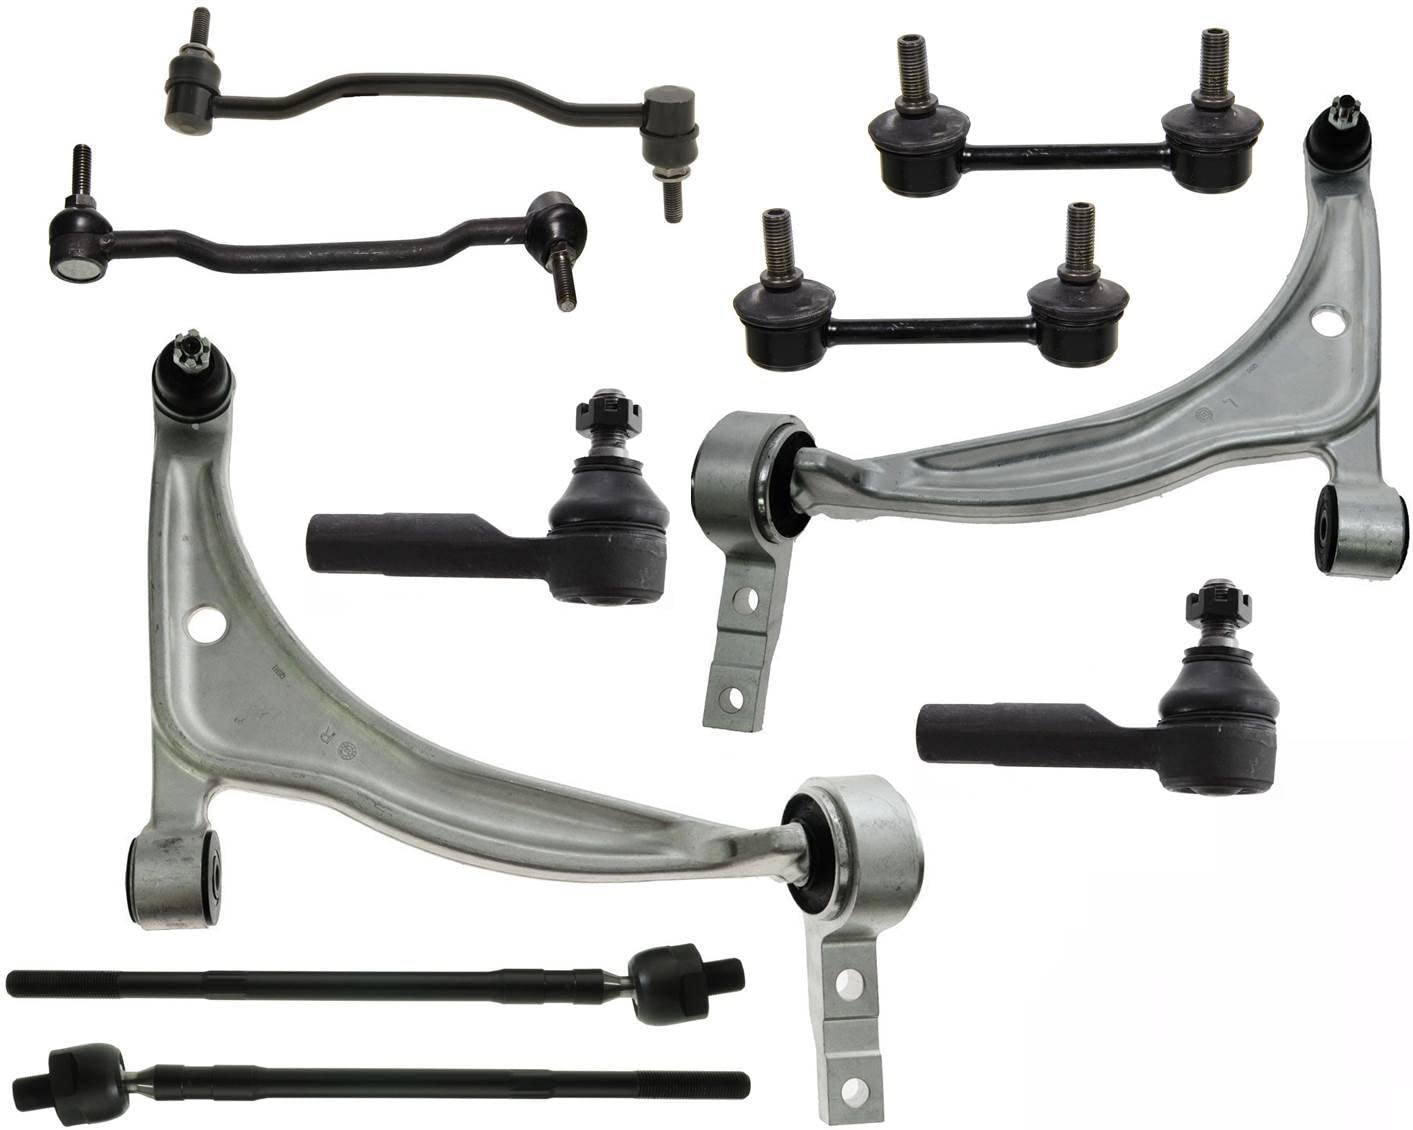 Hot Sale Auto Spare Parts 2001 All Rear Upper Control Arms For Mercedes Benz S Class W220 C320